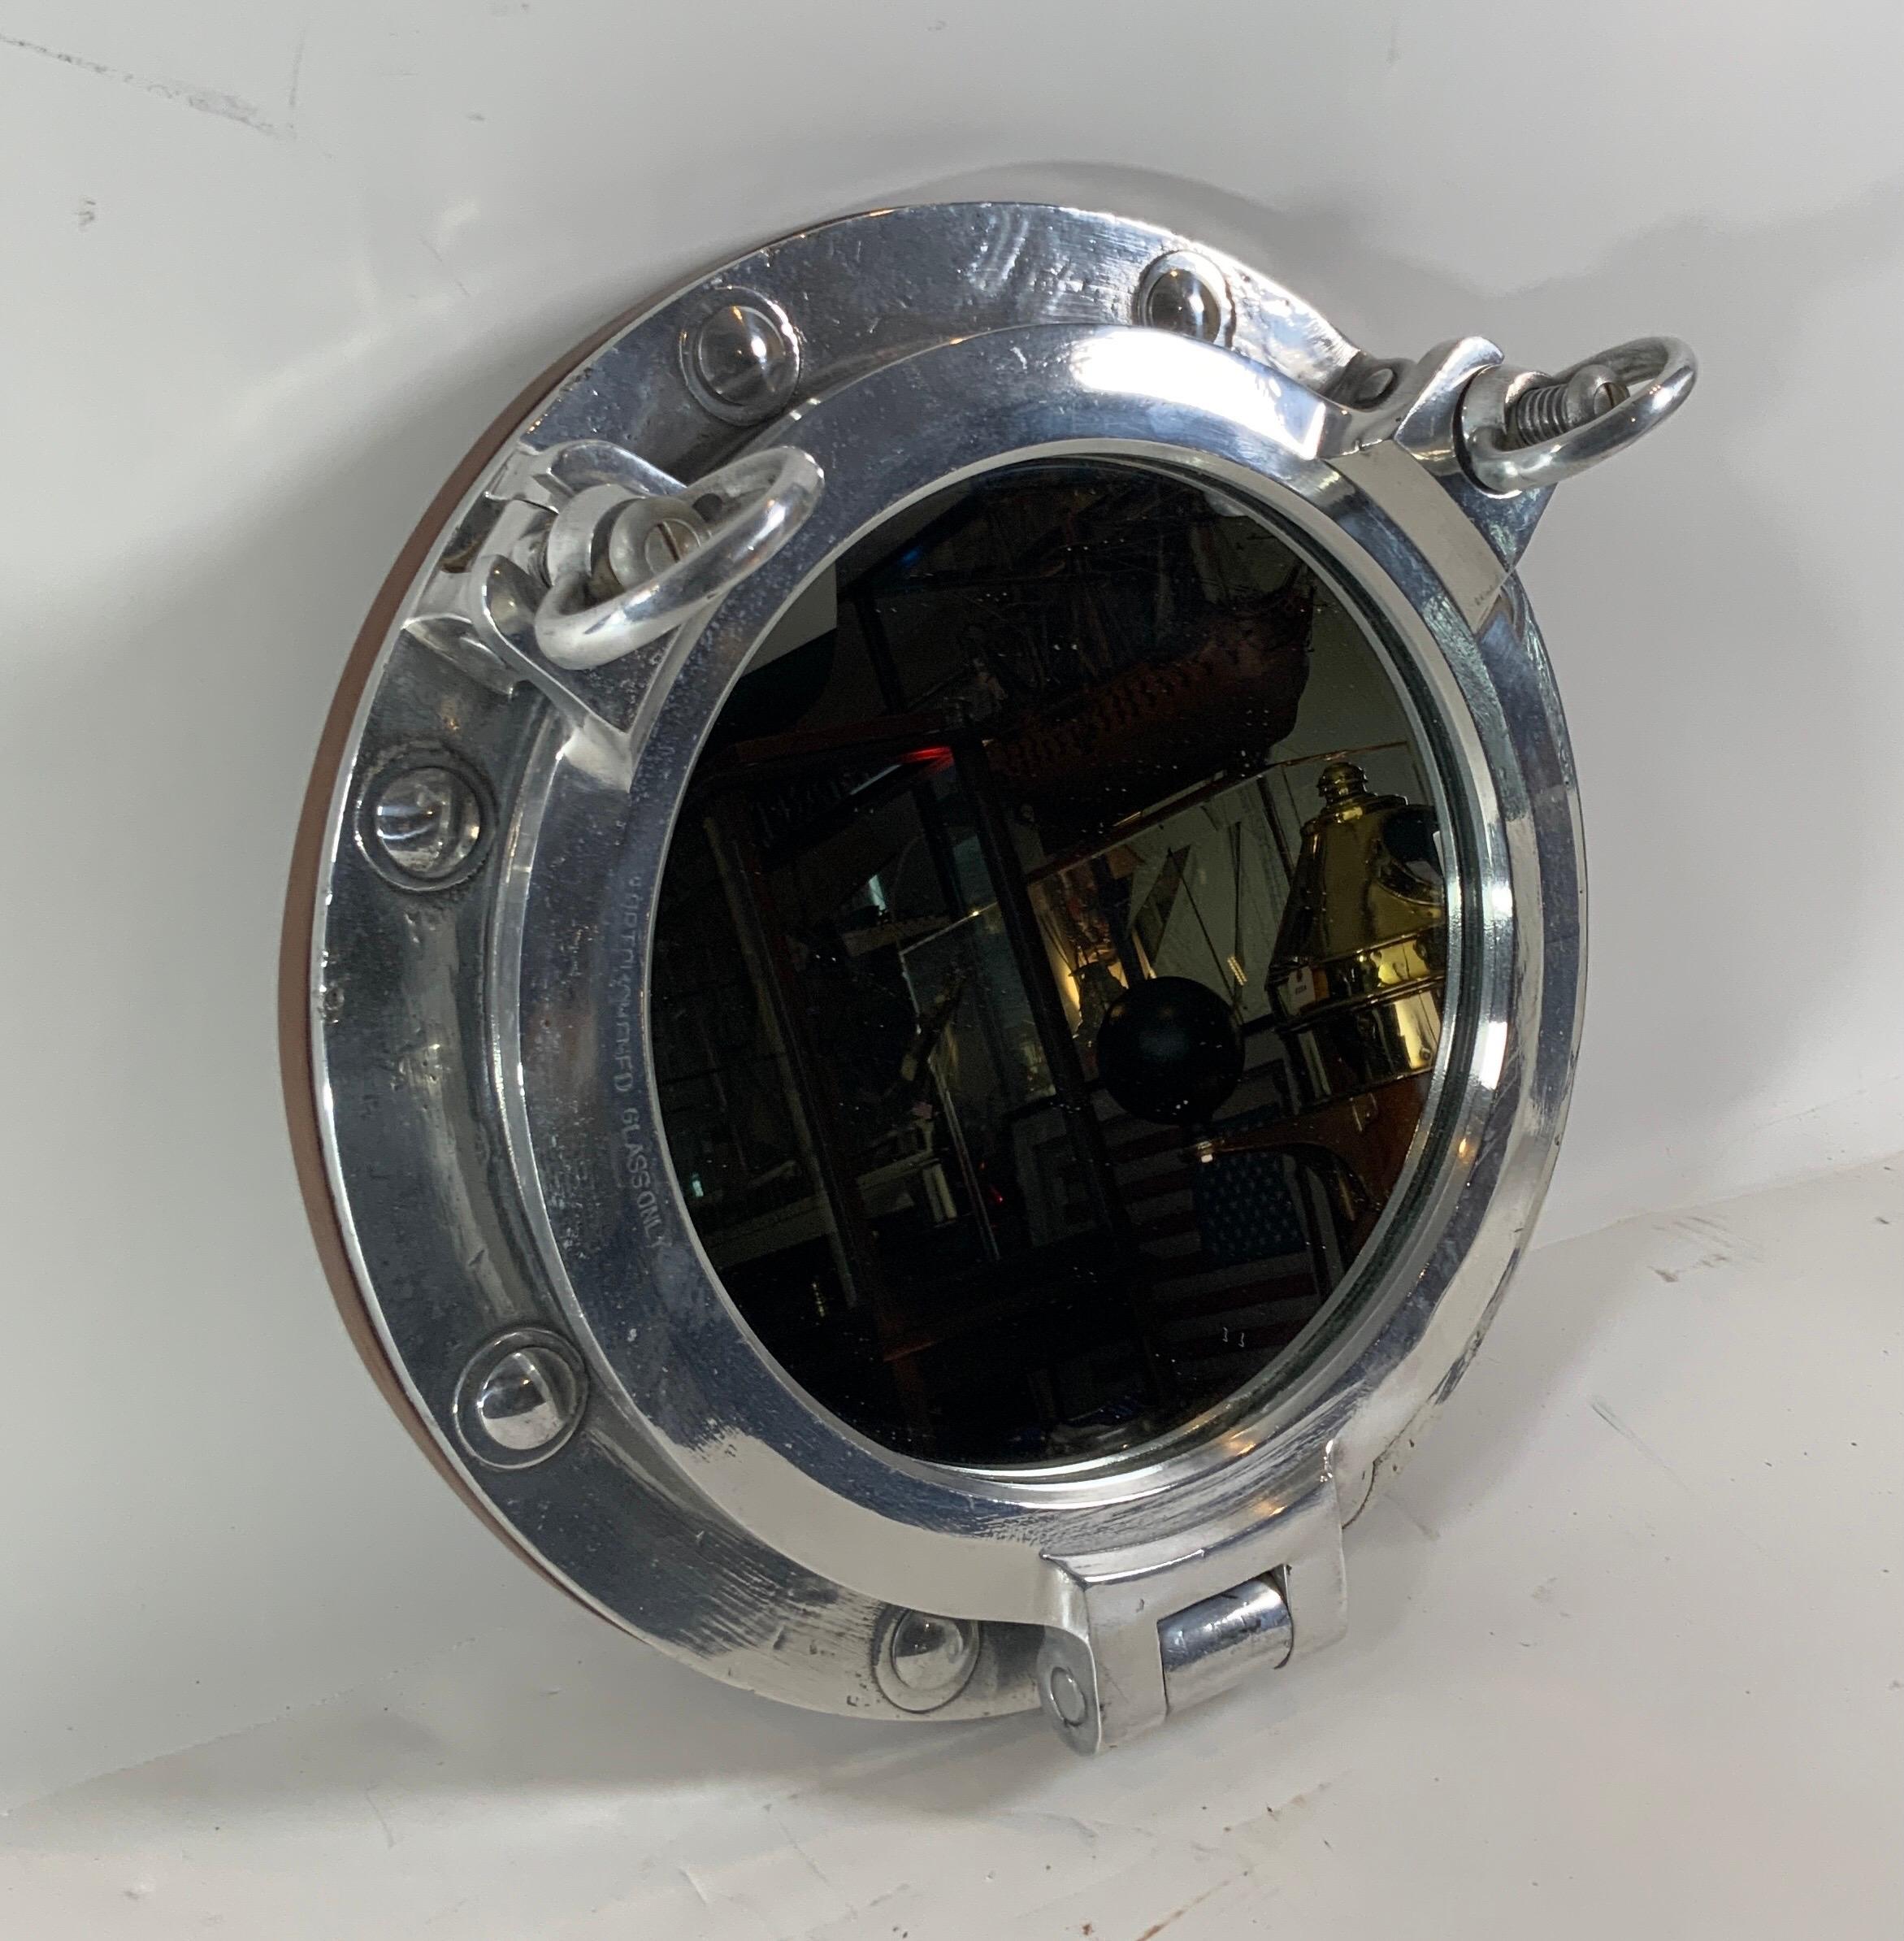 Authentic polished aluminum ship's porthole fitted with a glass mirror. Door is hinged and fitted with two dogbolts. The highly polished porthole is also fitted with a teakwood trim ring on the rear.

Overall dimensions: glass diameter: 10